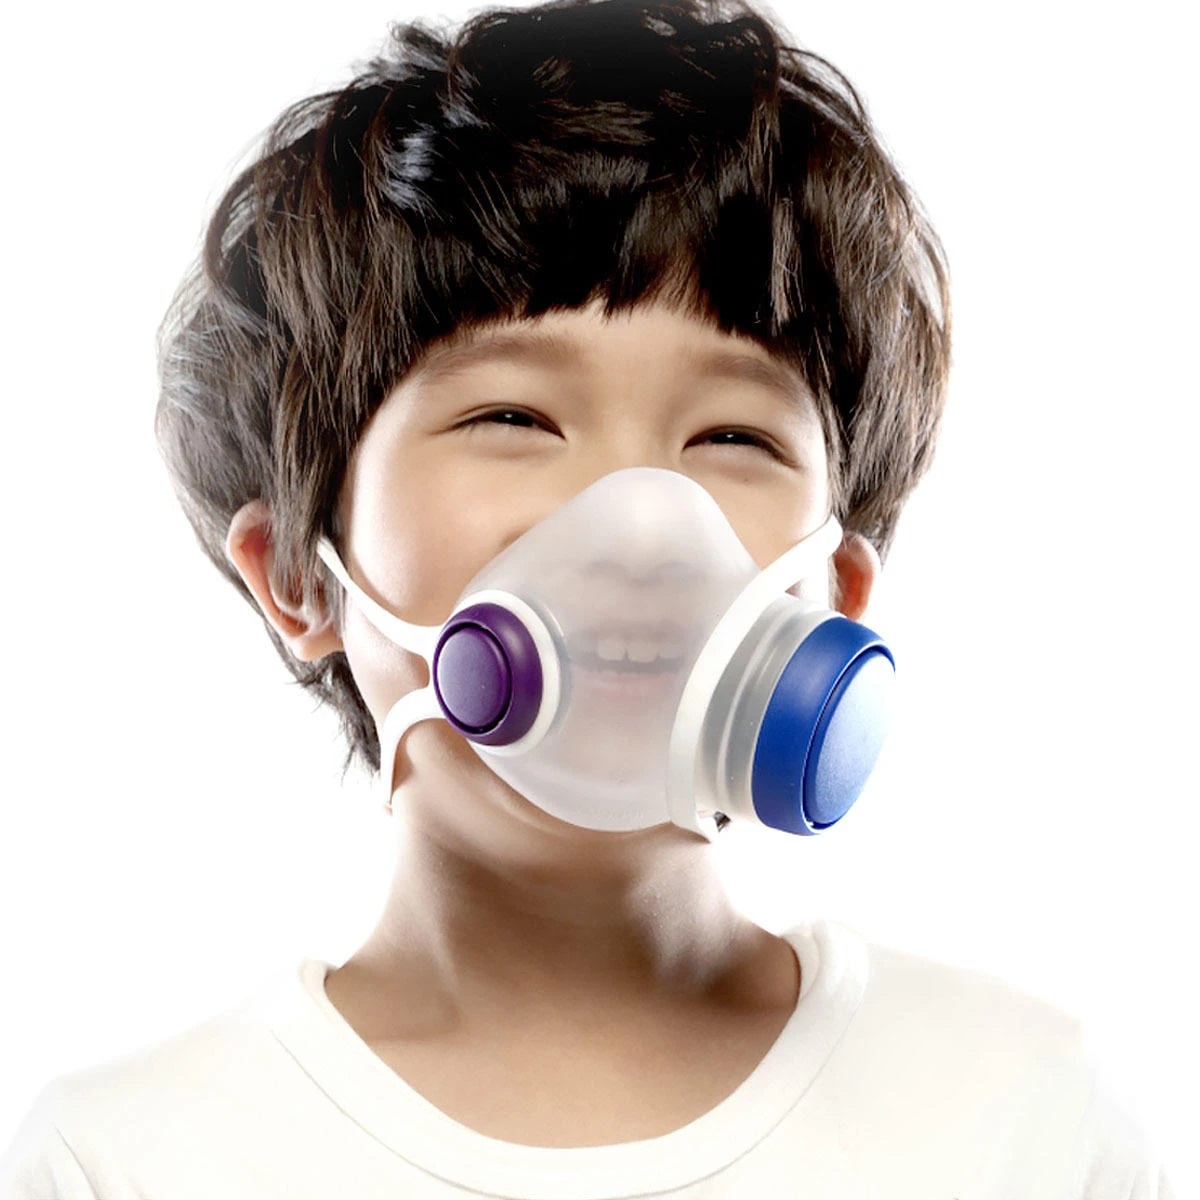 

Woobi Play Children Anti-Pollution Mask Reusable Washable F95 4-Layers Filter 95% Anti PM2.5 Safe Clean Breathing Mask From Xiaomi Youpin